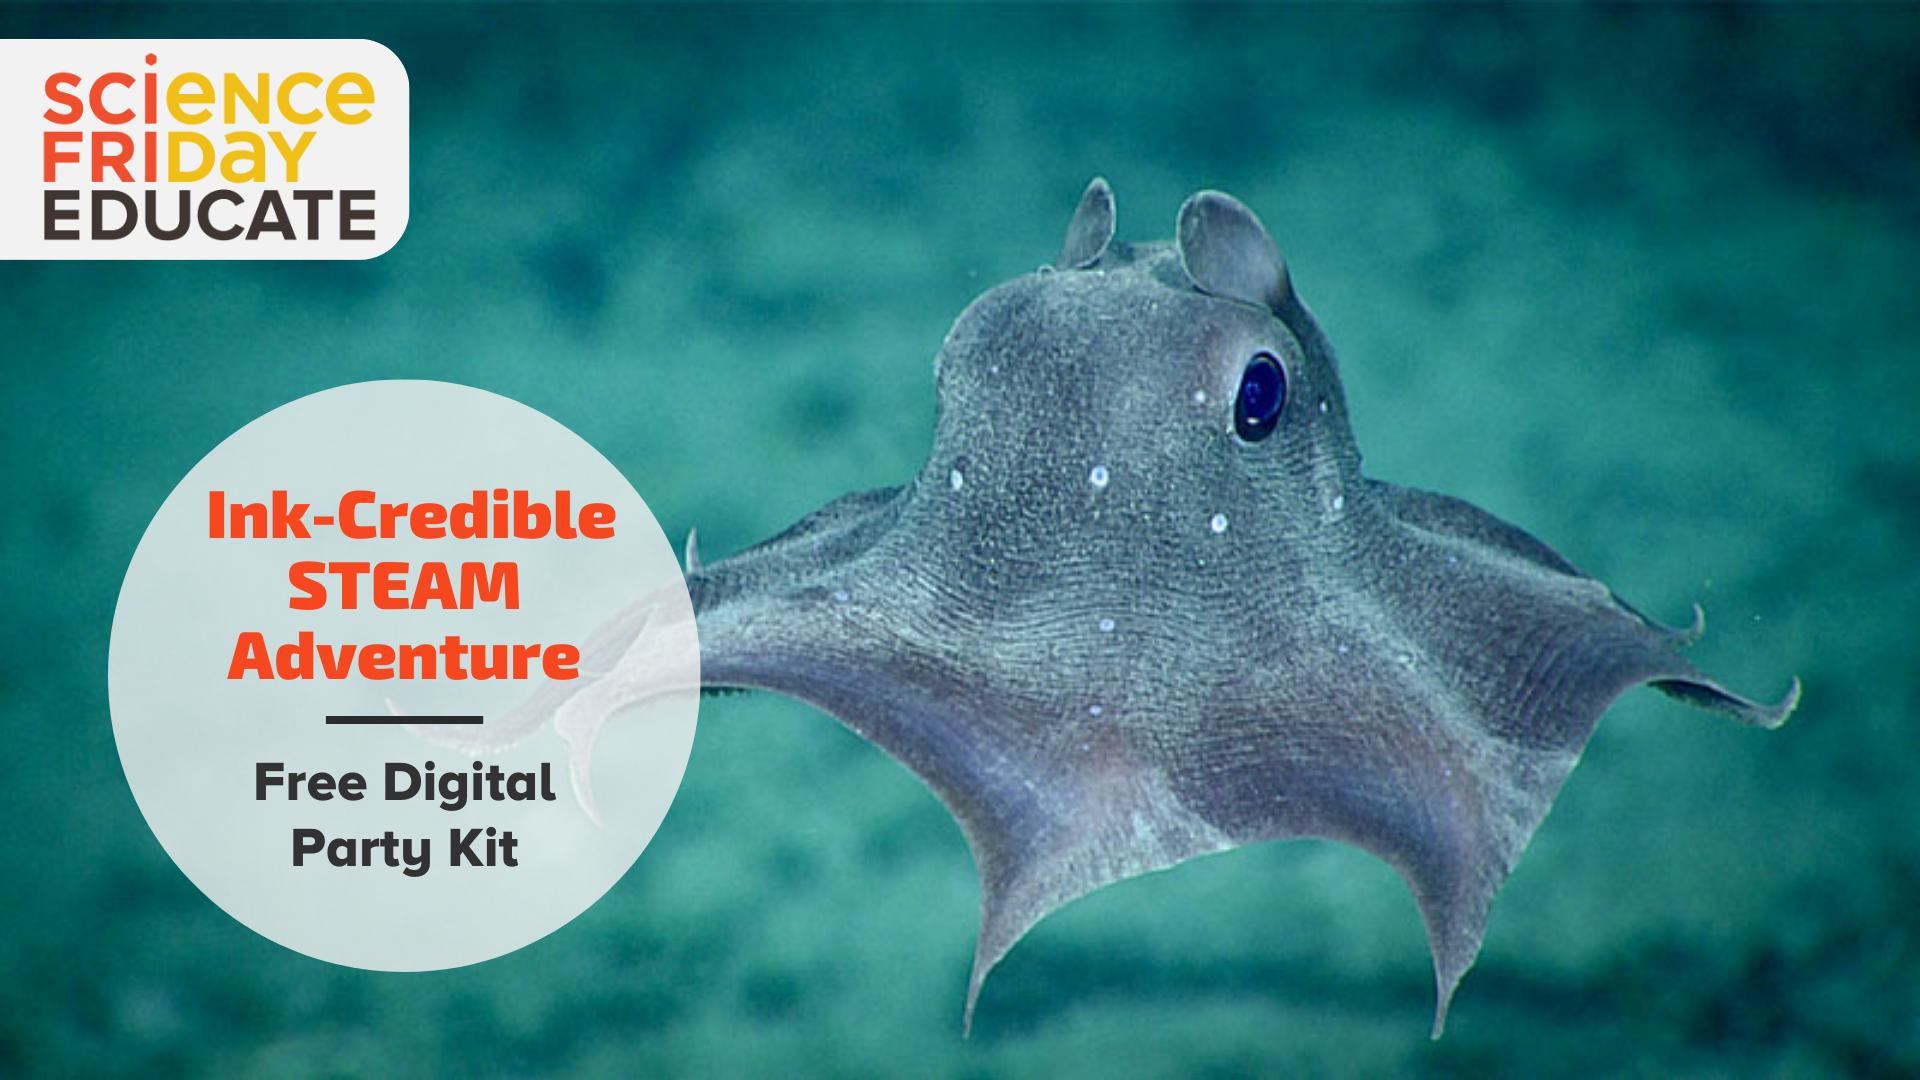 An illustrated ocean background frames a picture of a dumbo octopus.